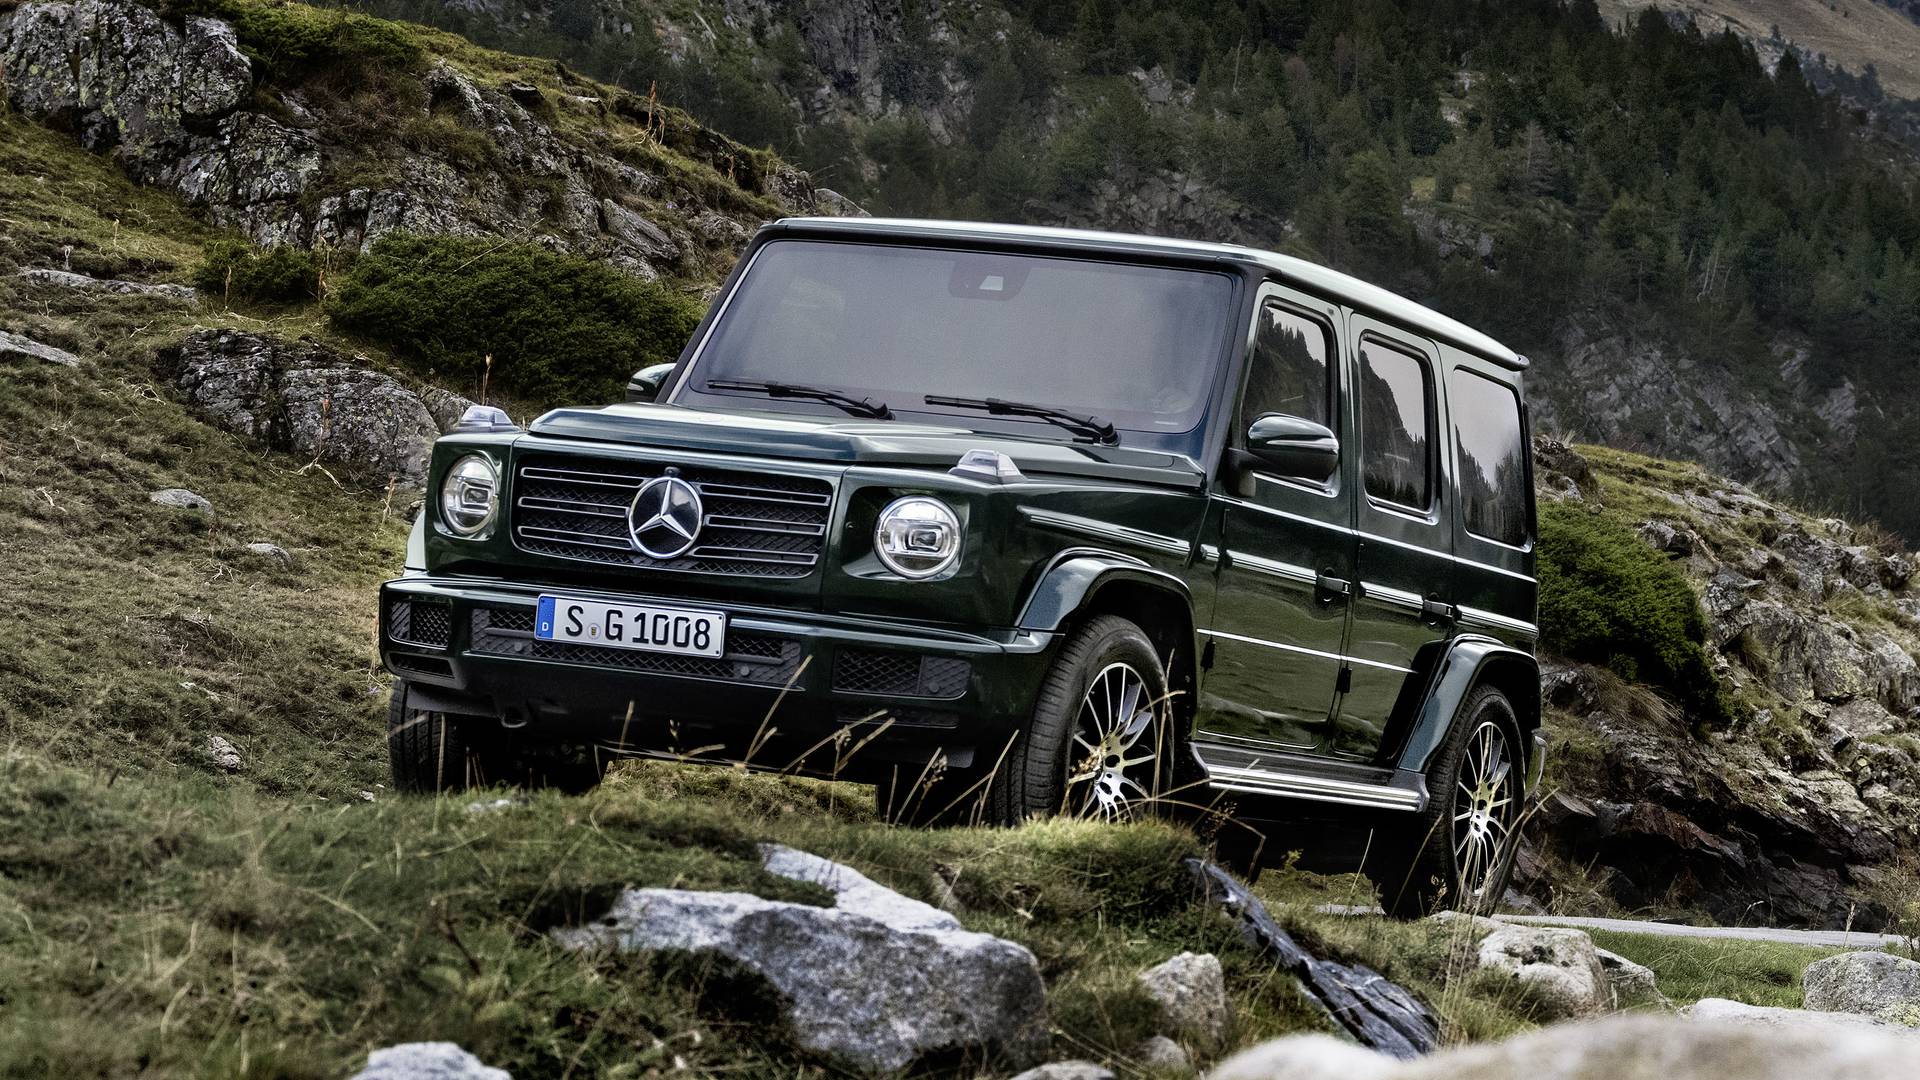 Mercedes G Class Is The “Jewel” Of The Lineup